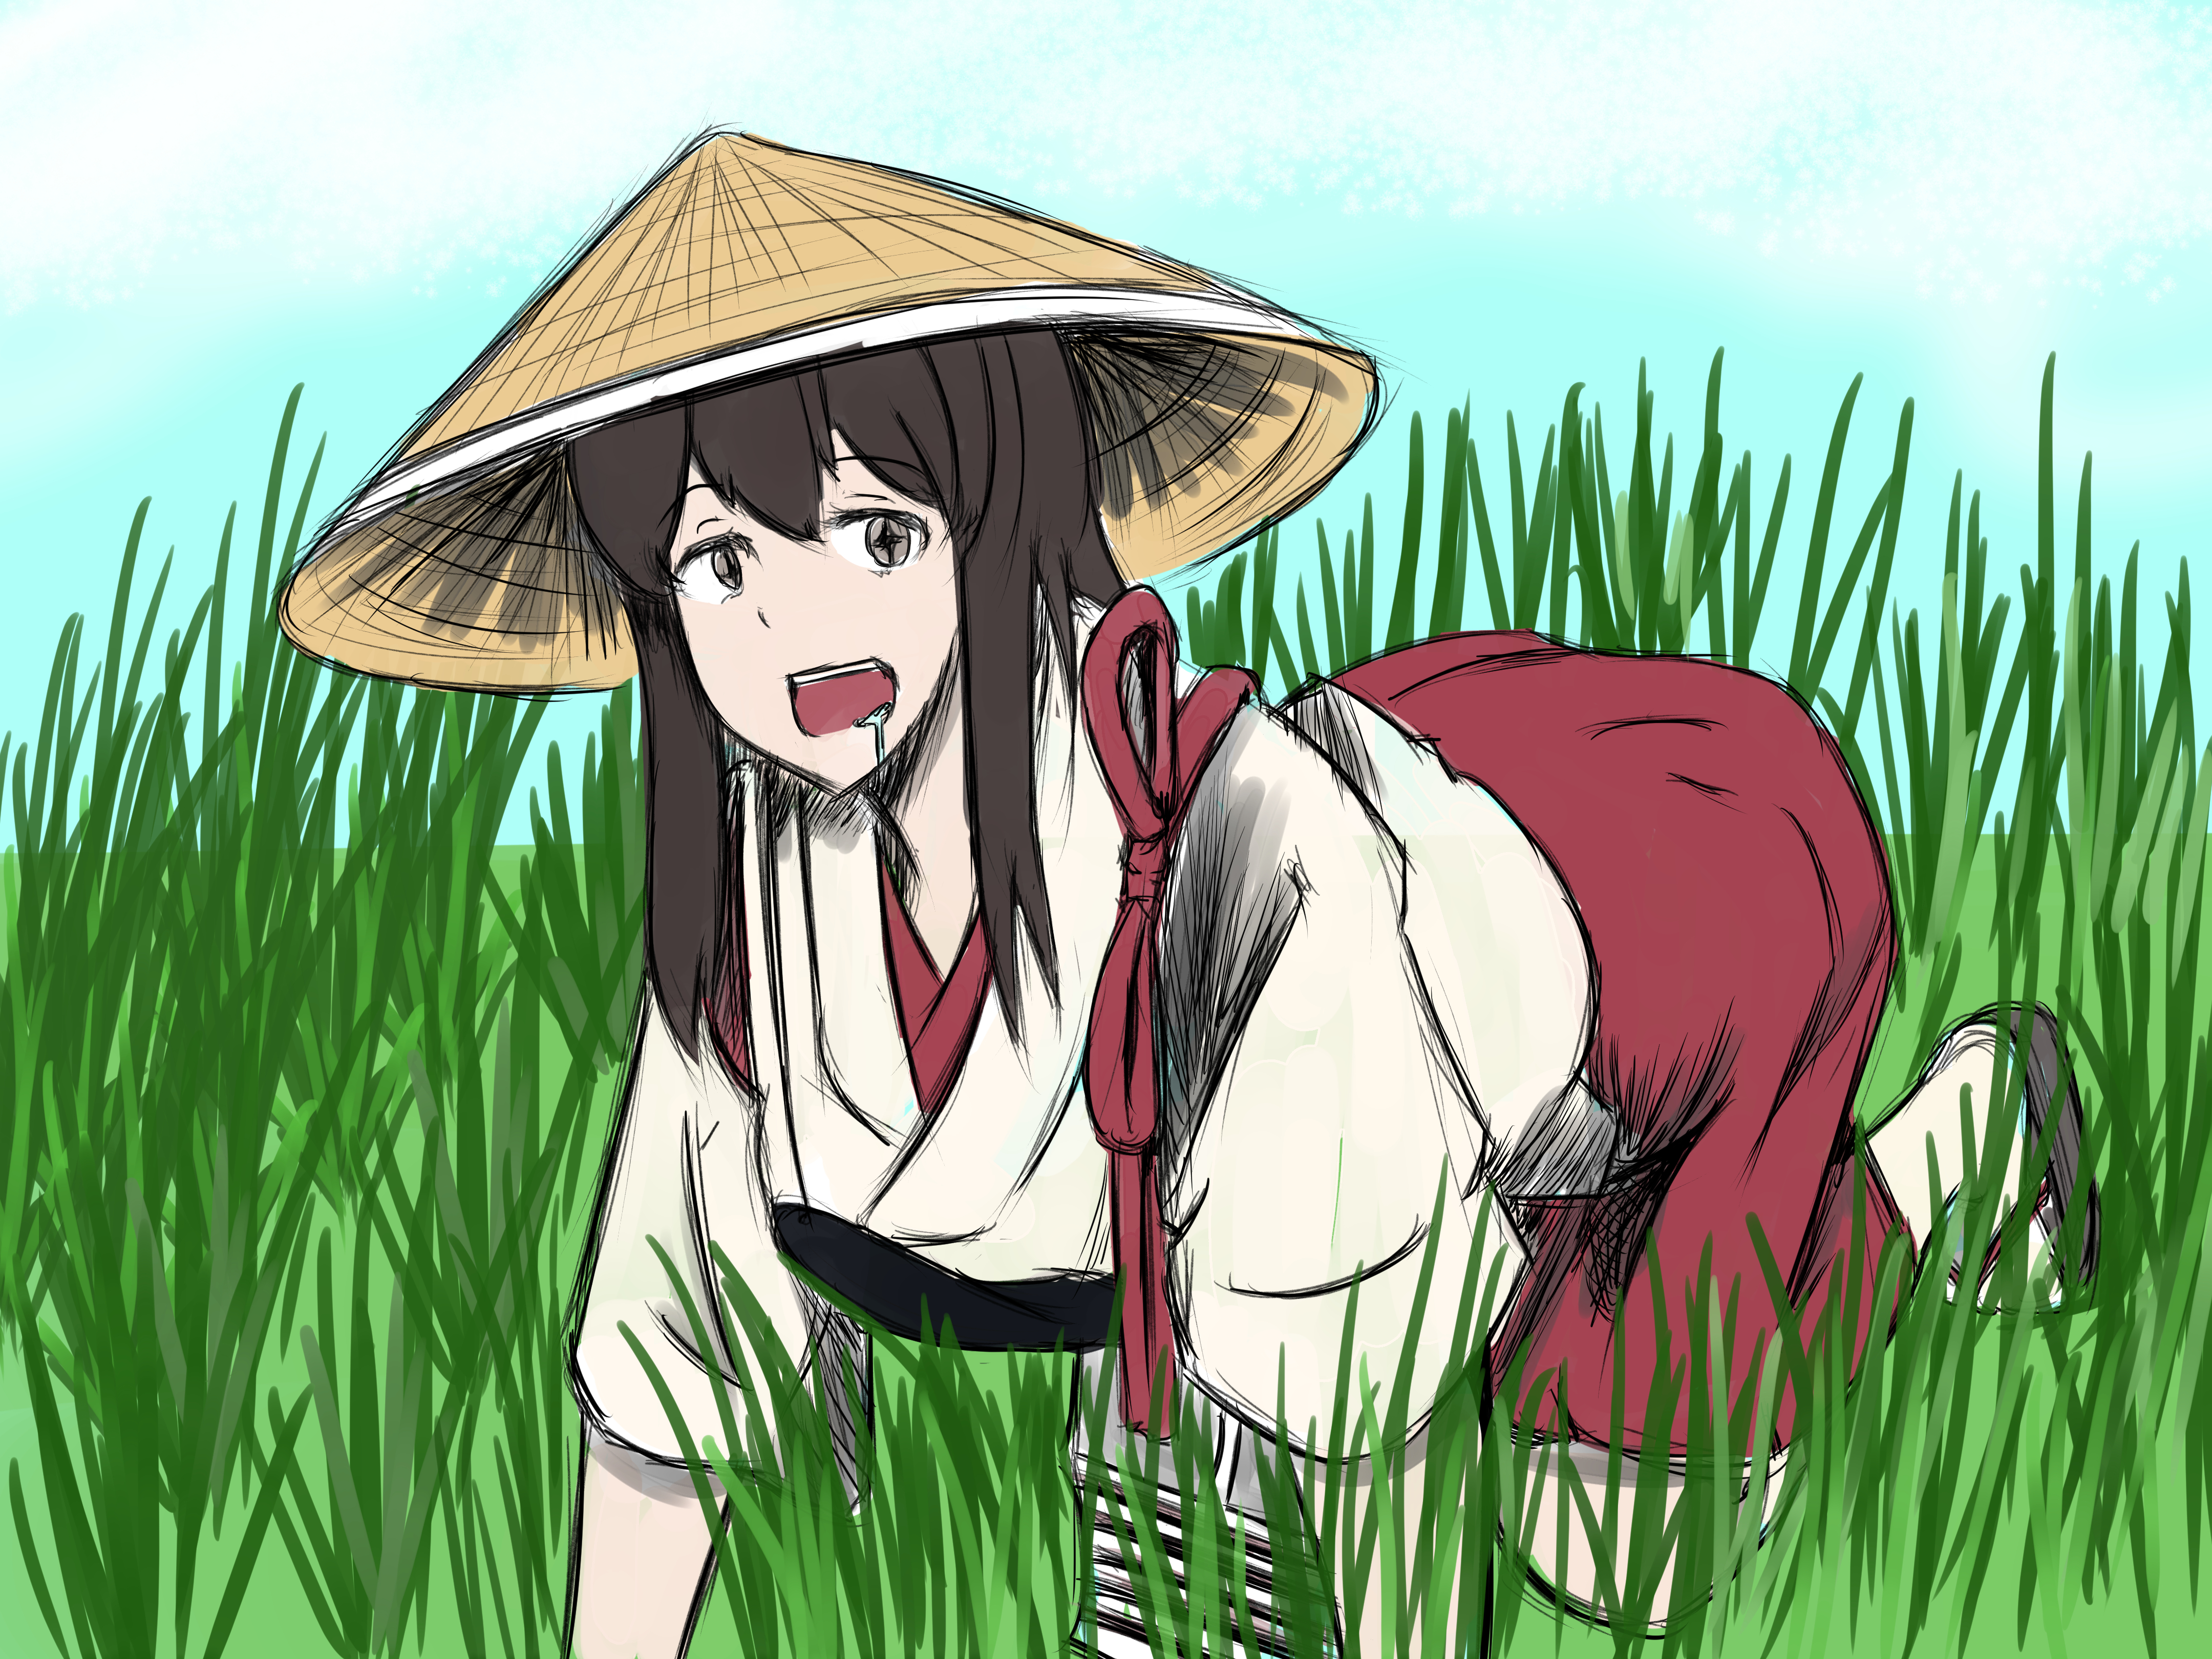 TO THE RICE FIELDS by DunePl0 on DeviantArt 